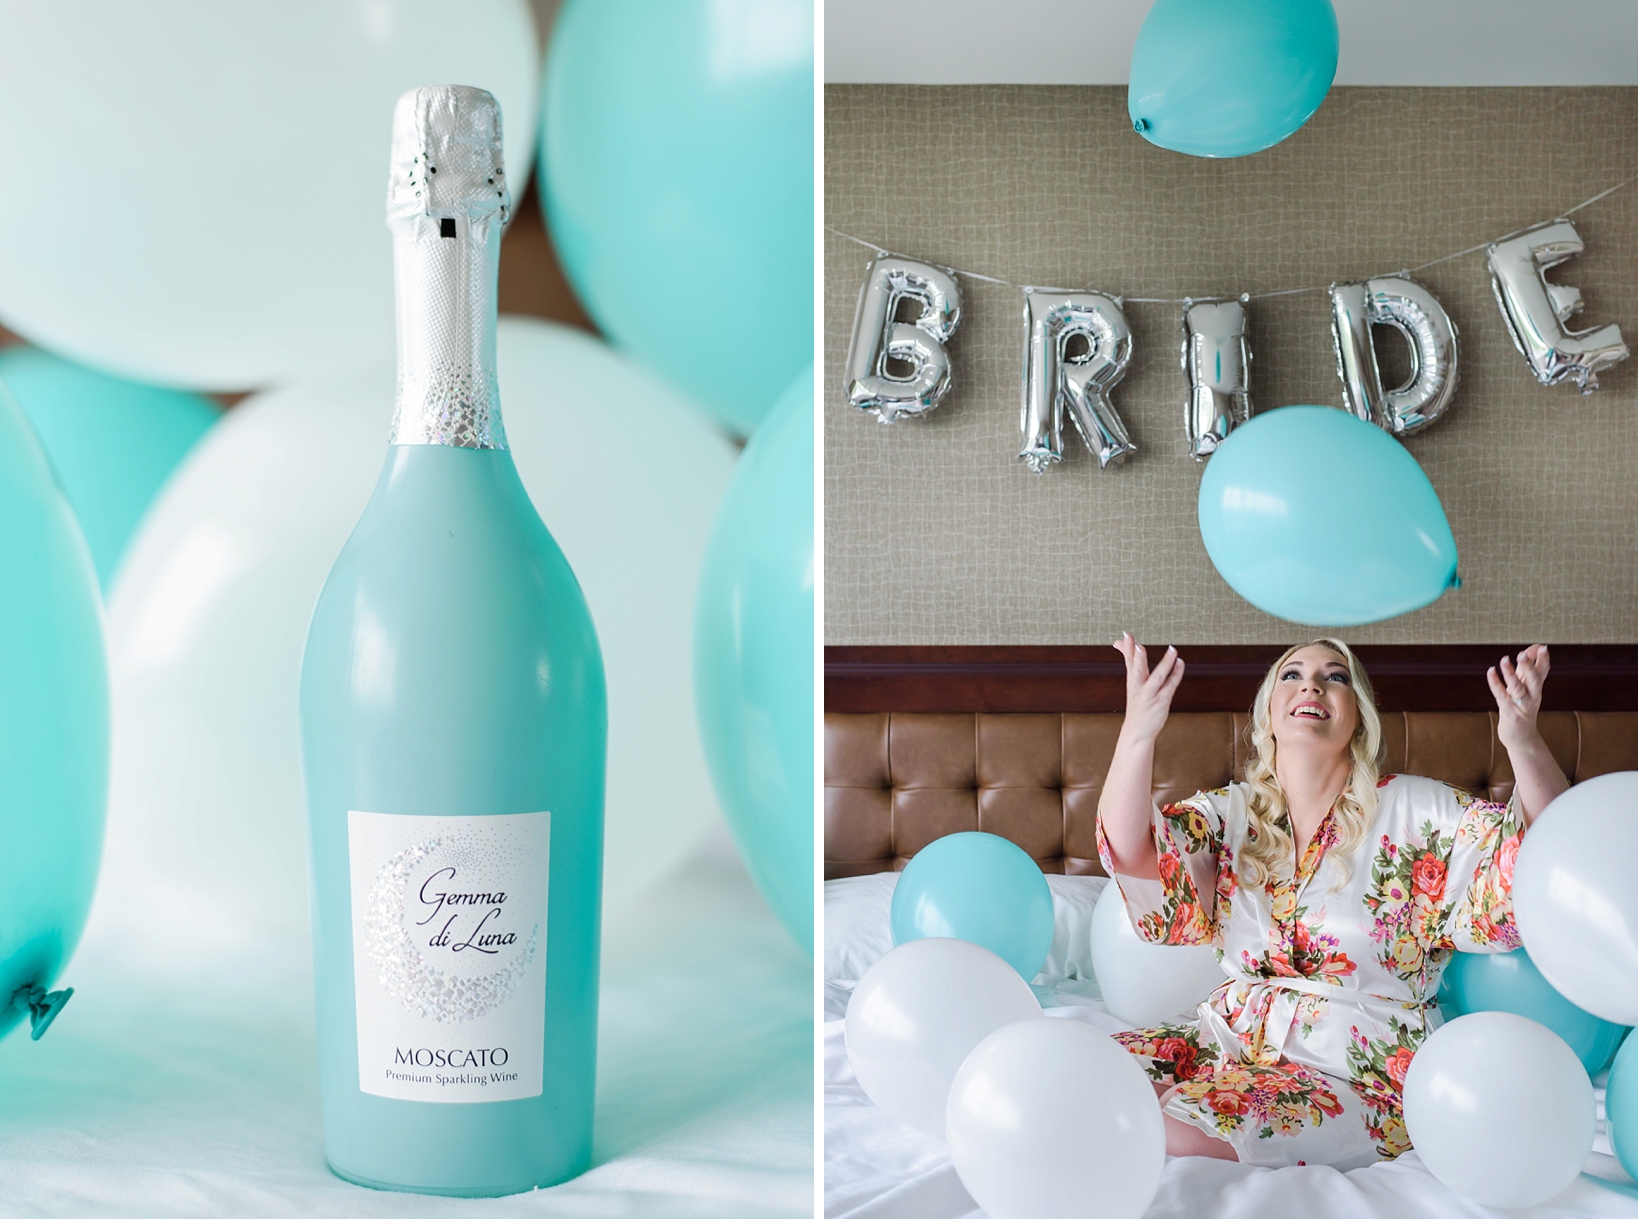 Tiffany blue balloons surround the bride in her floral robe before her wedding